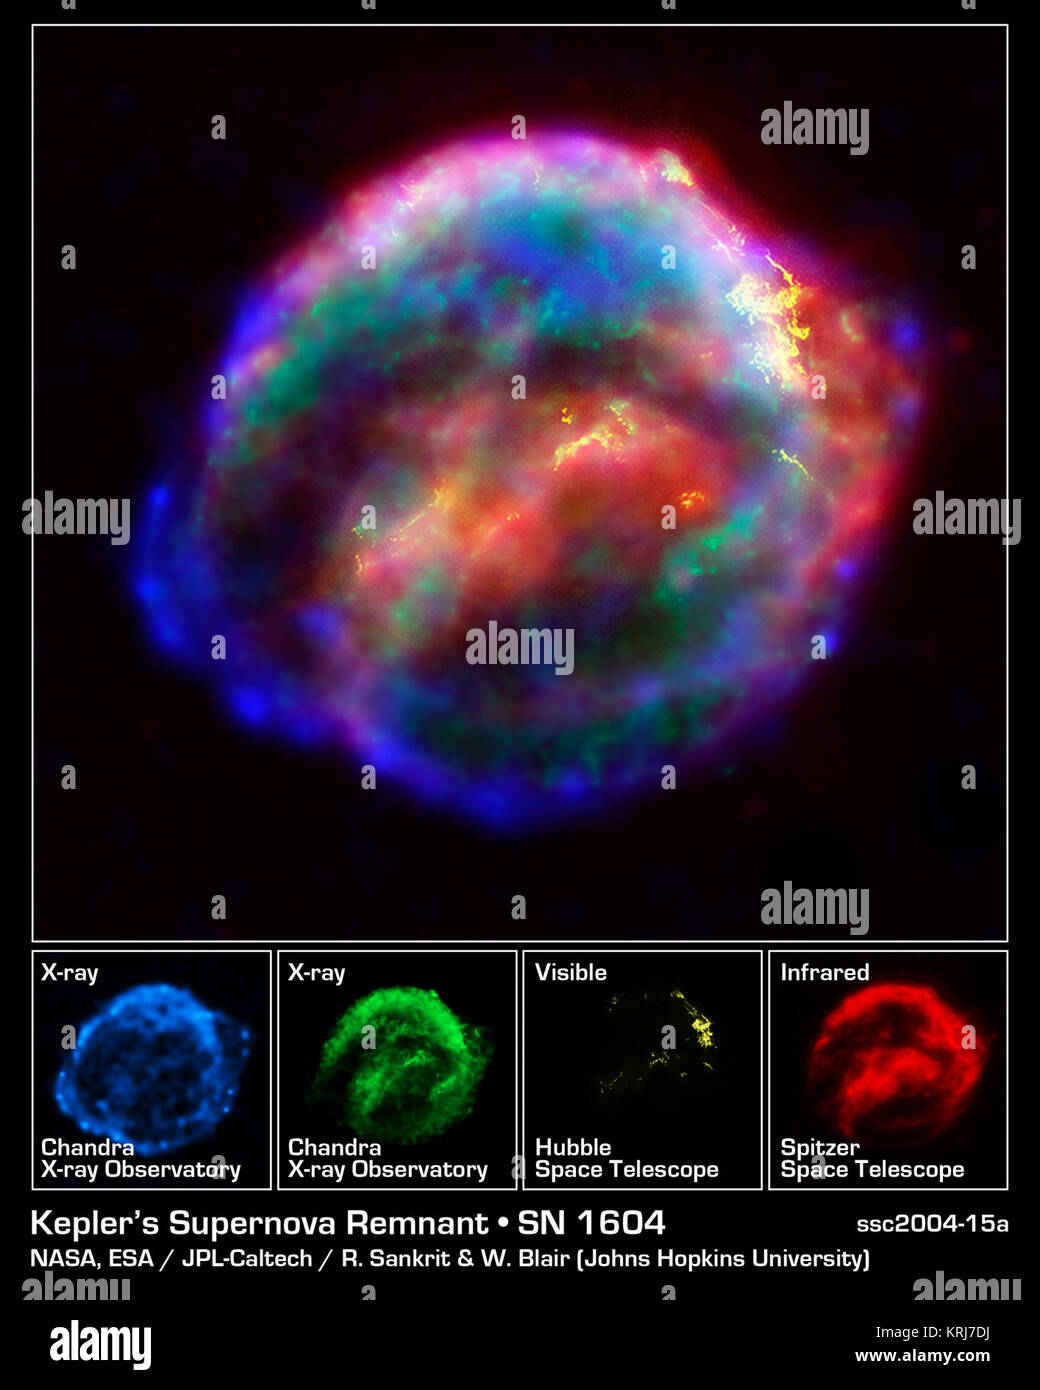 NASA's three Great Observatories -- the Hubble Space Telescope, the Spitzer Space Telescope, and the Chandra X-ray Observatory -- joined forces to probe the expanding remains of a supernova, called Kepler's supernova remnant, first seen 400 years ago by sky watchers, including famous astronomer Johannes Kepler.  The combined image unveils a bubble-shaped shroud of gas and dust that is 14 light-years wide and is expanding at 4 million miles per hour (2,000 kilometers per second). Observations from each telescope highlight distinct features of the supernova remnant, a fast-moving shell of iron-r Stock Photo